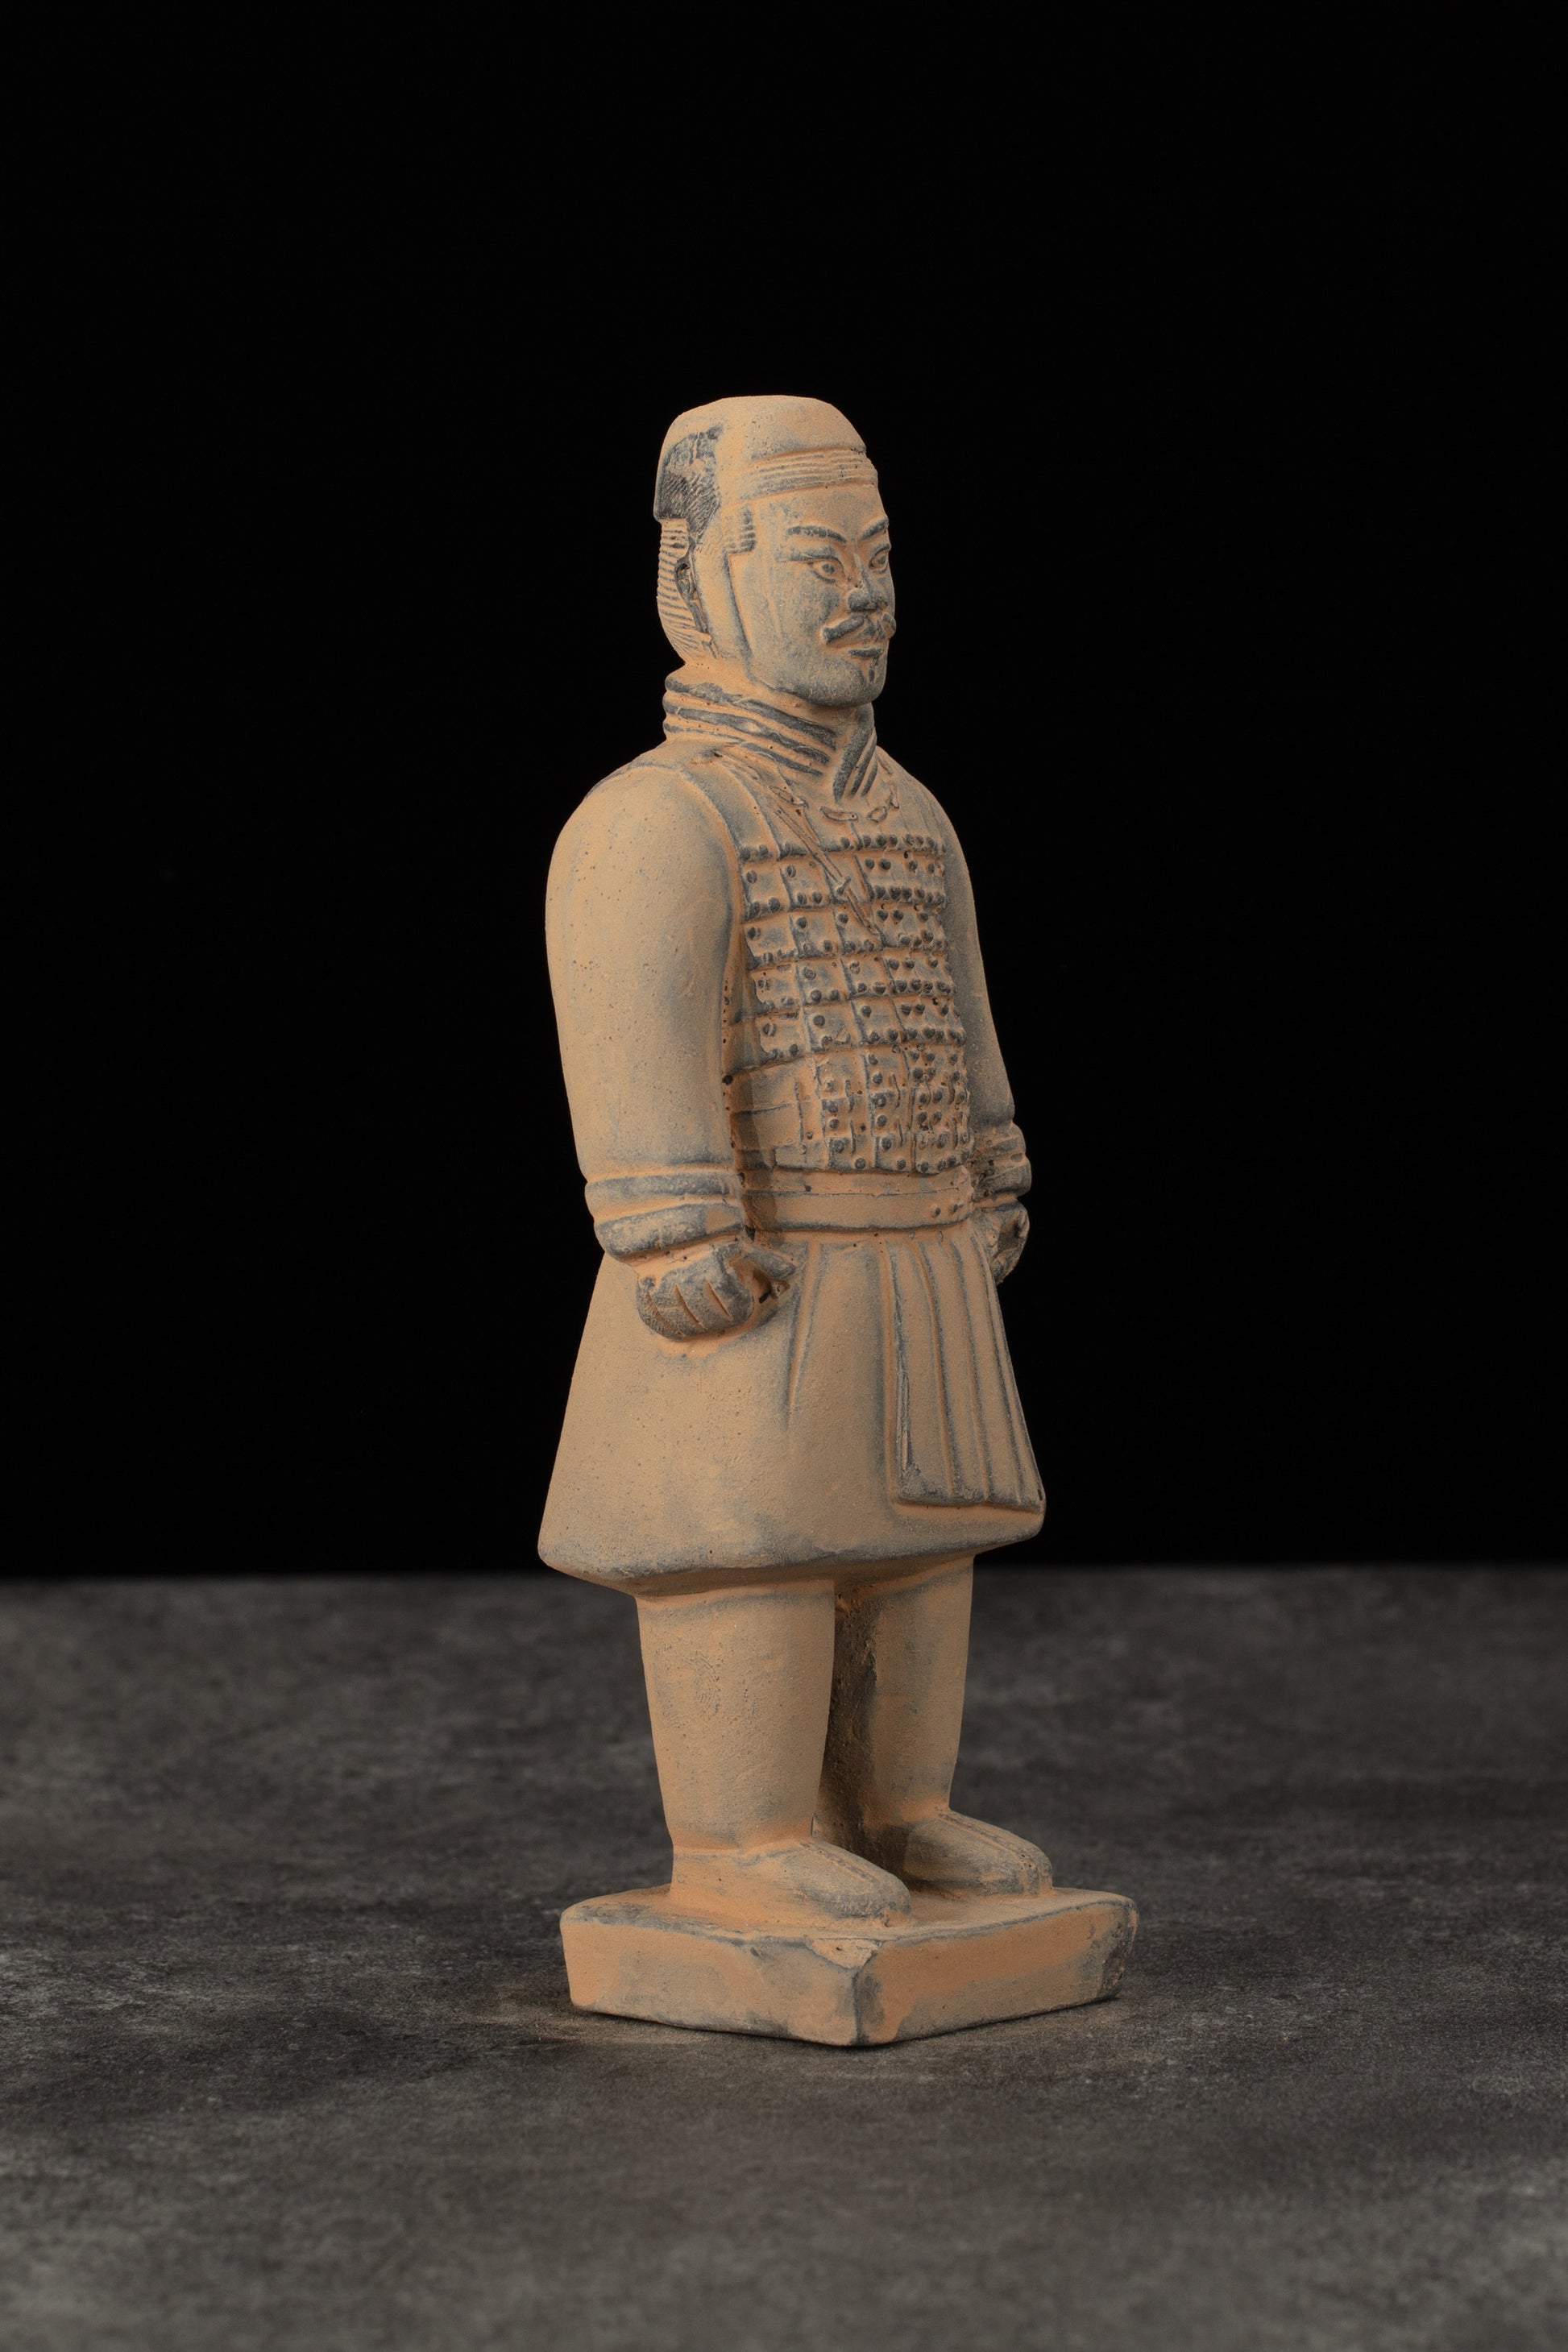 15CM Cavalryman - CLAYARMY-Artistic angle capturing the 15CM Cavalryman's side profile, emphasizing the elegant design of the knee-length jacket and leather boots.